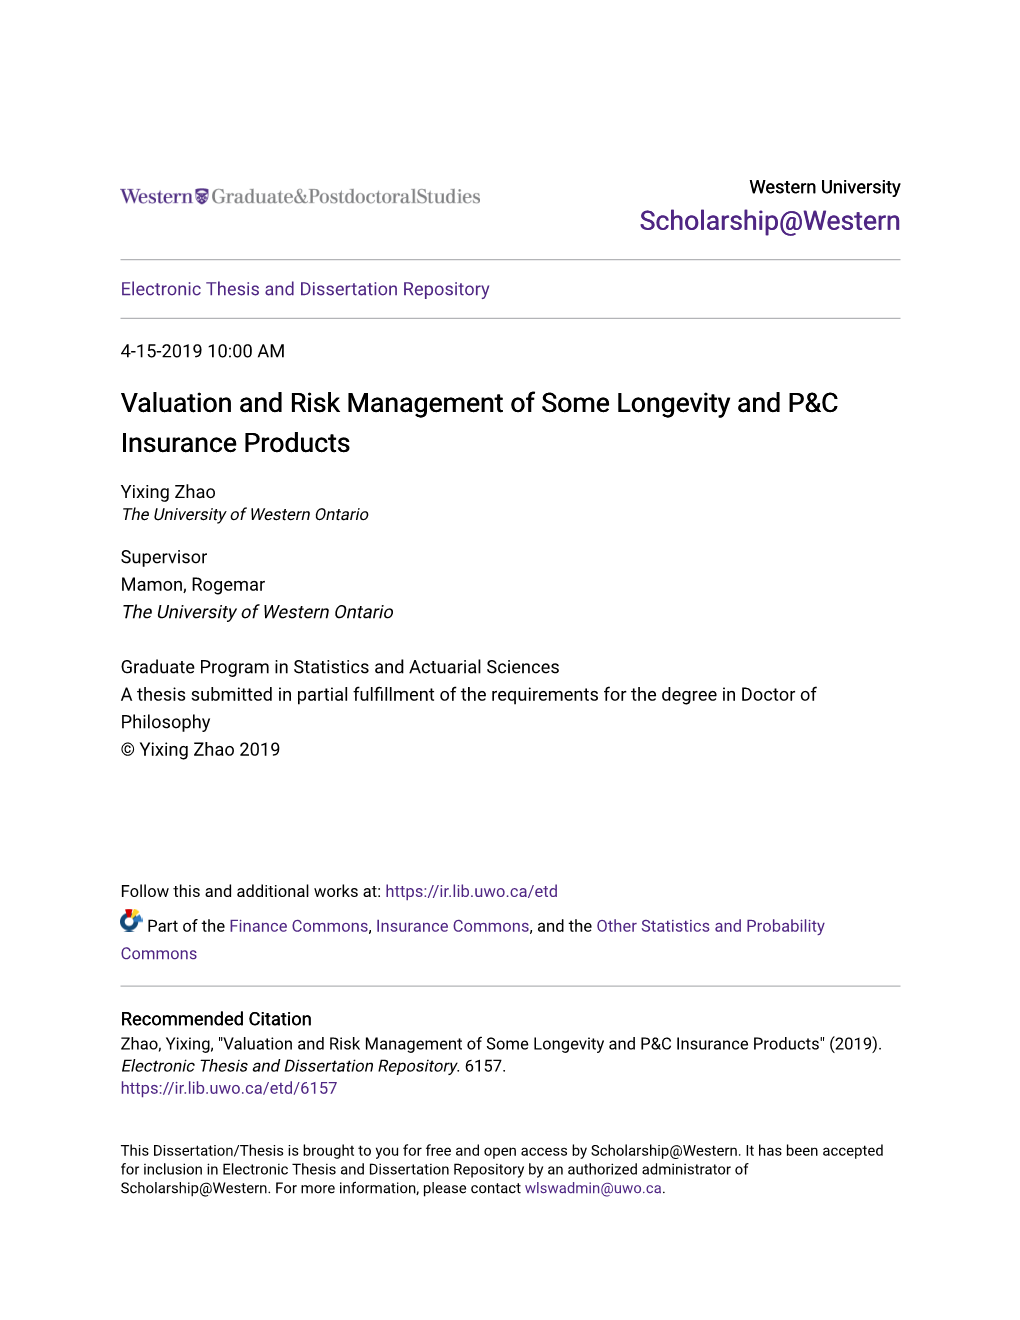 Valuation and Risk Management of Some Longevity and P&C